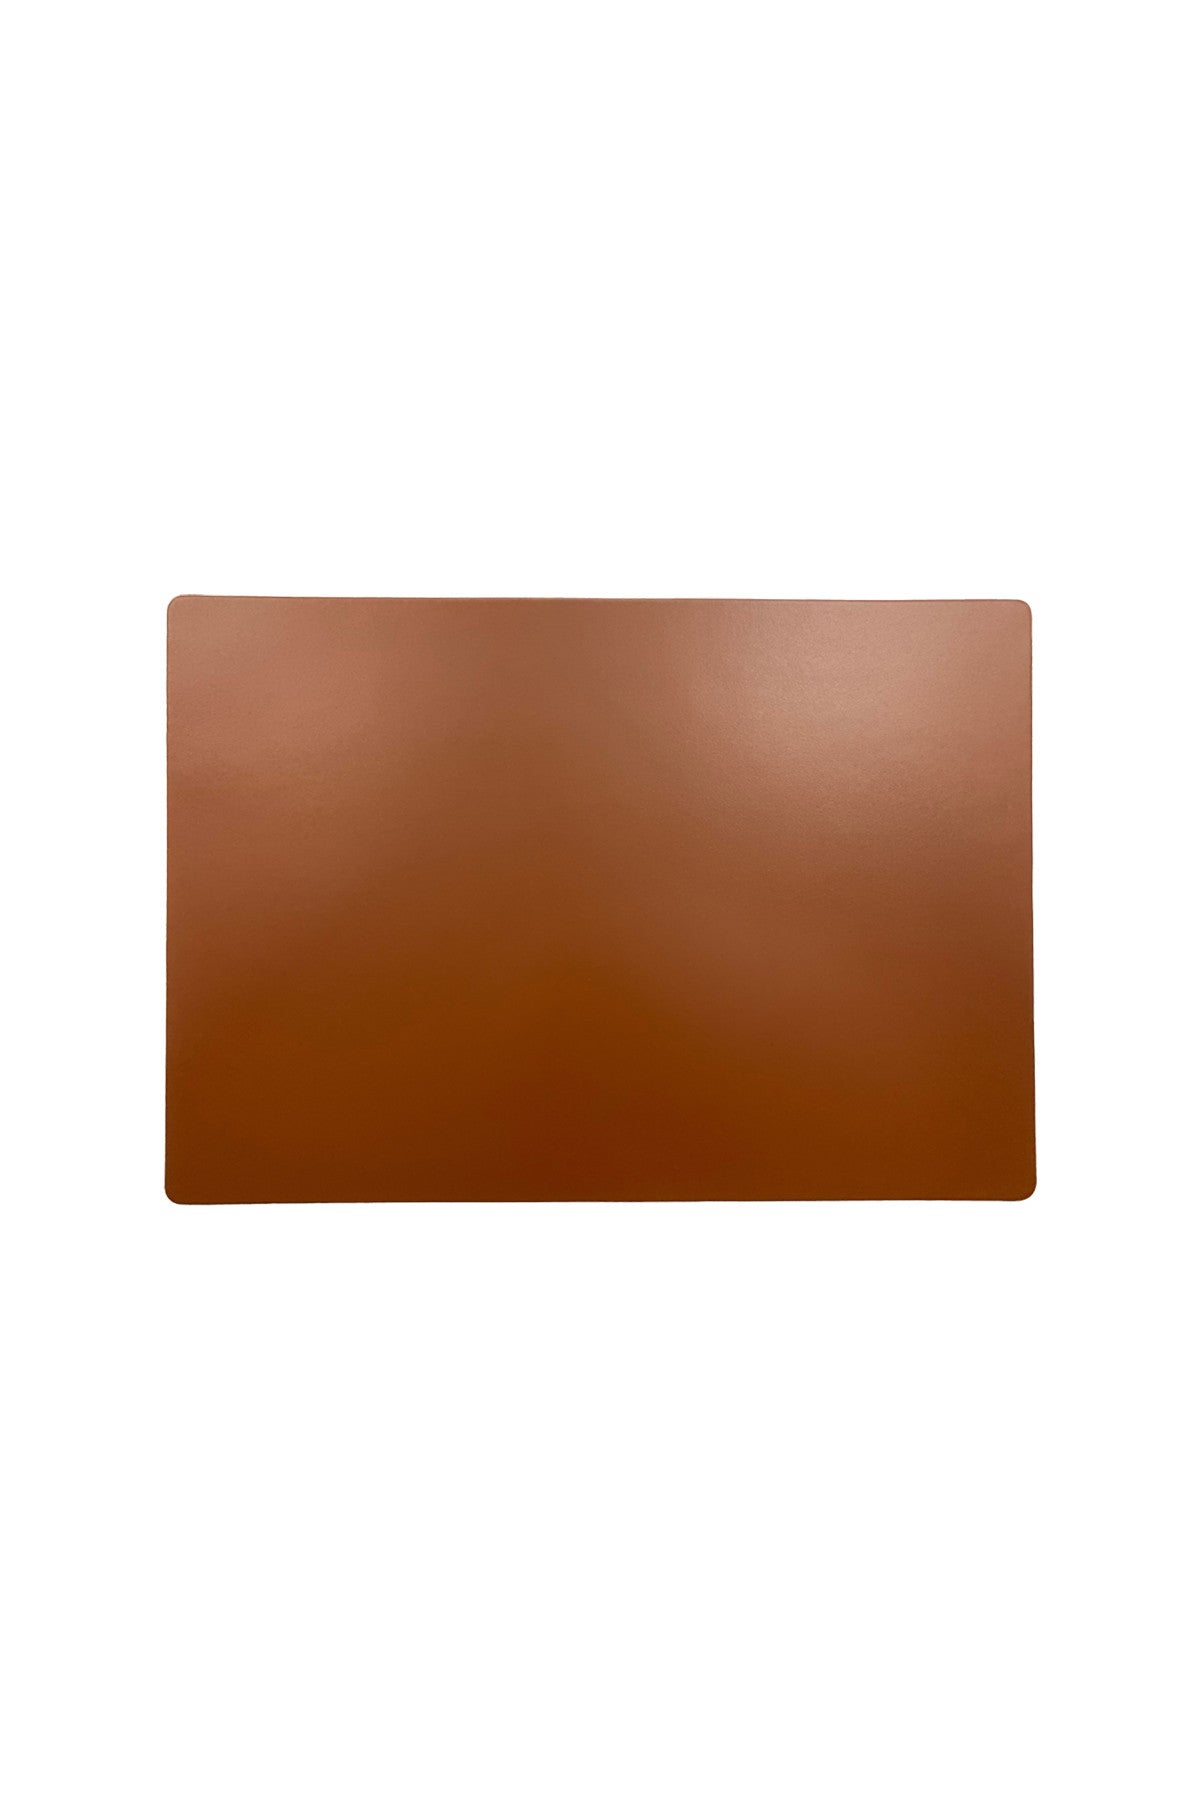 PLACEMAT WITH NAPKIN RING, leather brown